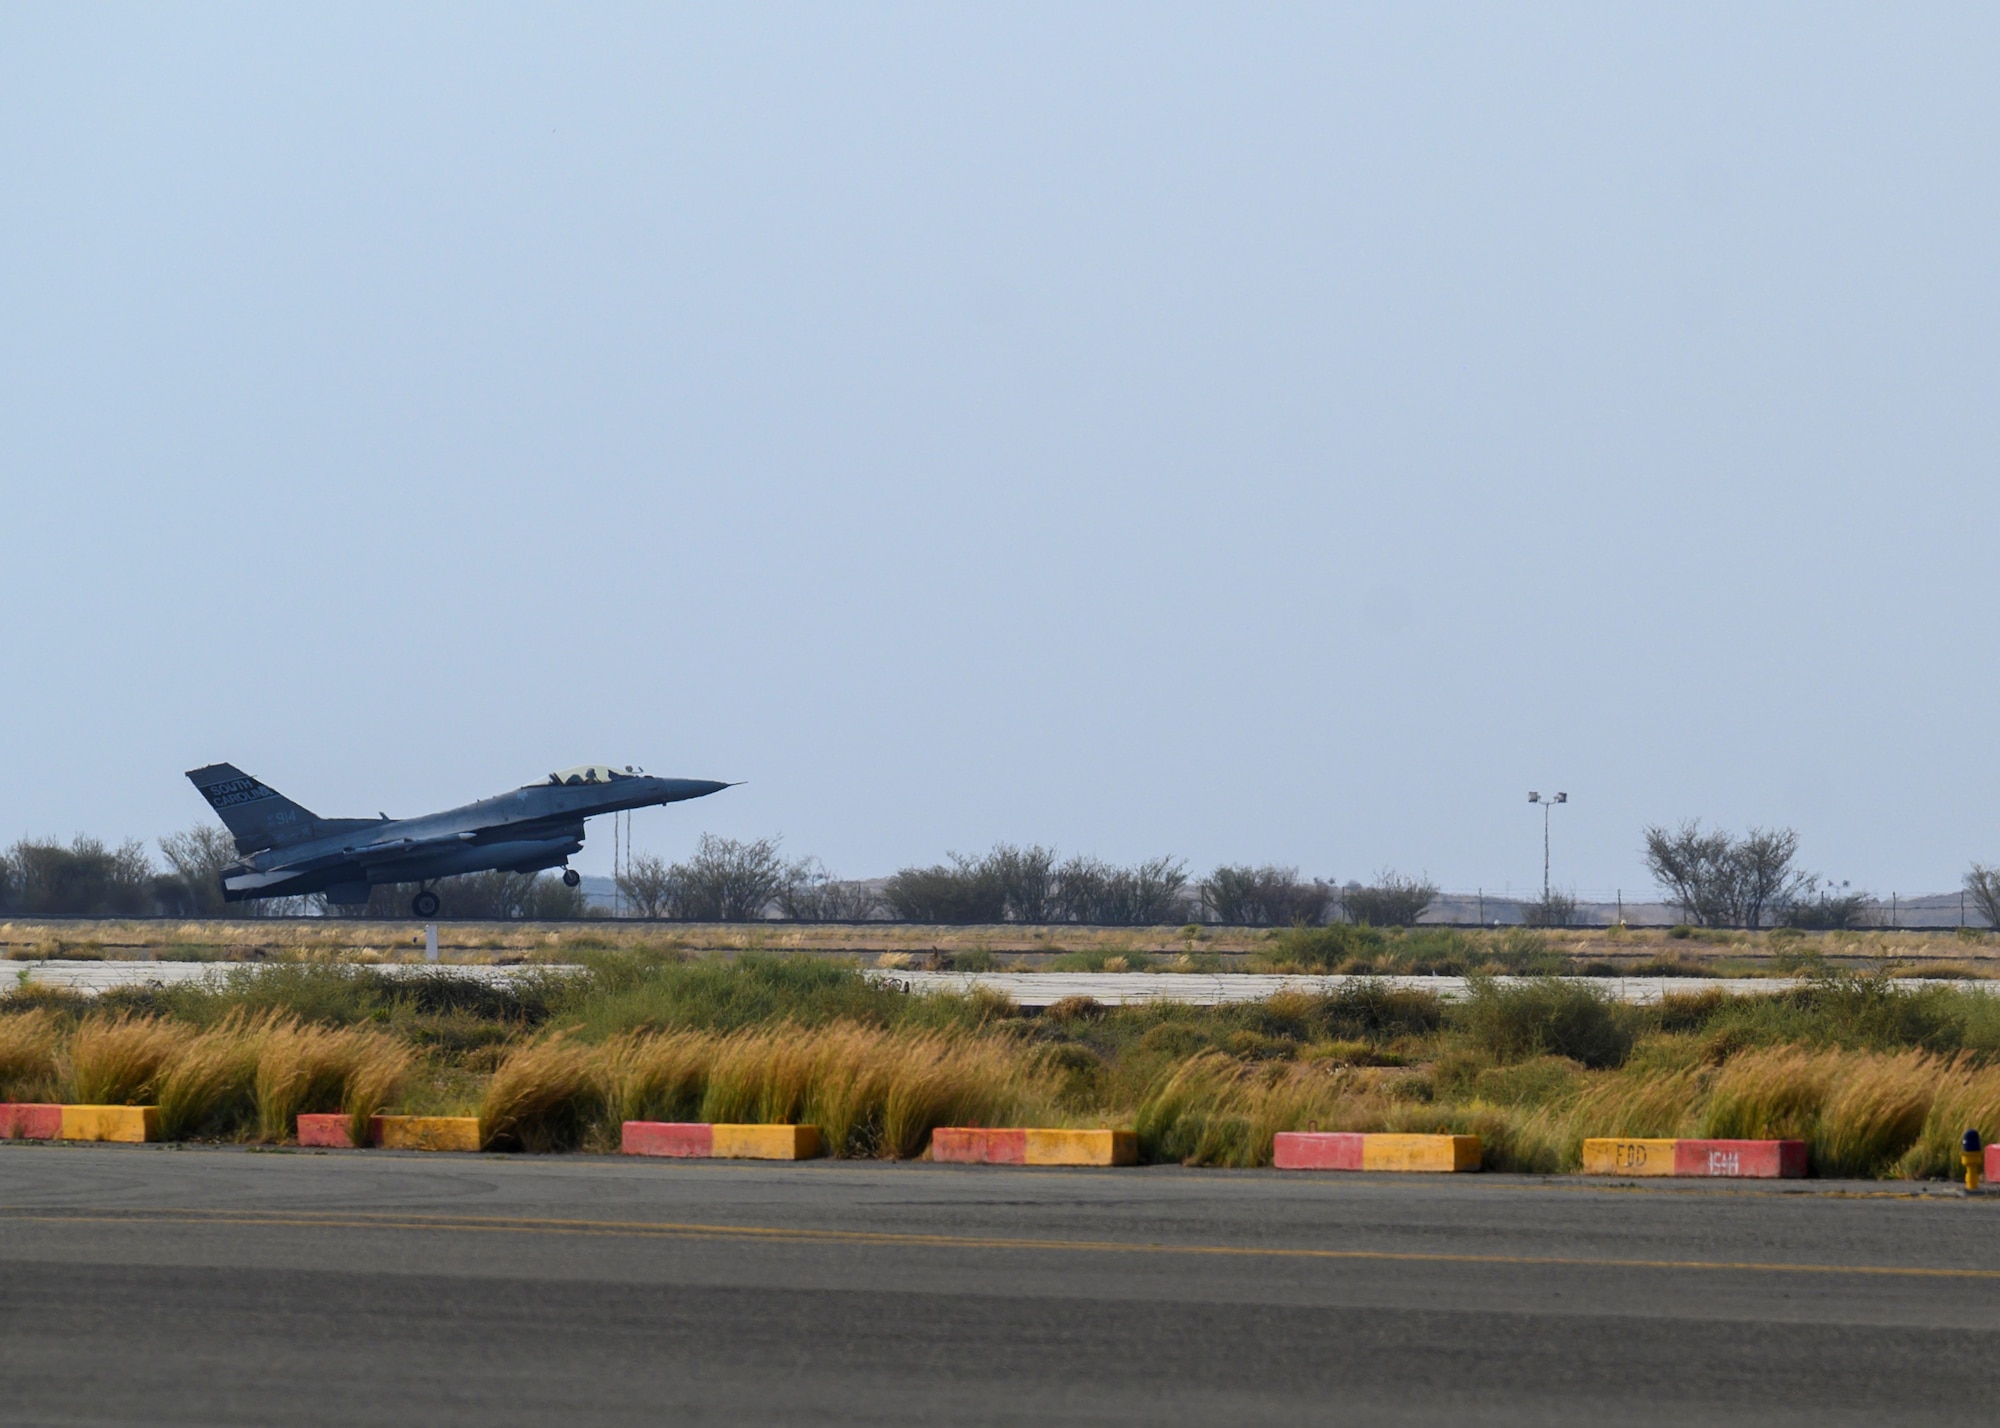 A U.S. Air Force F-16 Fighting Falcon arrives for a counter unmanned aerial system integration mission with joint and Royal Saudi aircraft at a forward location in the Kingdom of Saudi Arabia, June 30, 2021. U.S. Air Forces Central aircraft regularly work with coalition and partner nations to test their collective counter-UAS capabilities to ensure the security and stability of regional airspace. (U.S. Air Force photo by Senior Airman Samuel Earick)